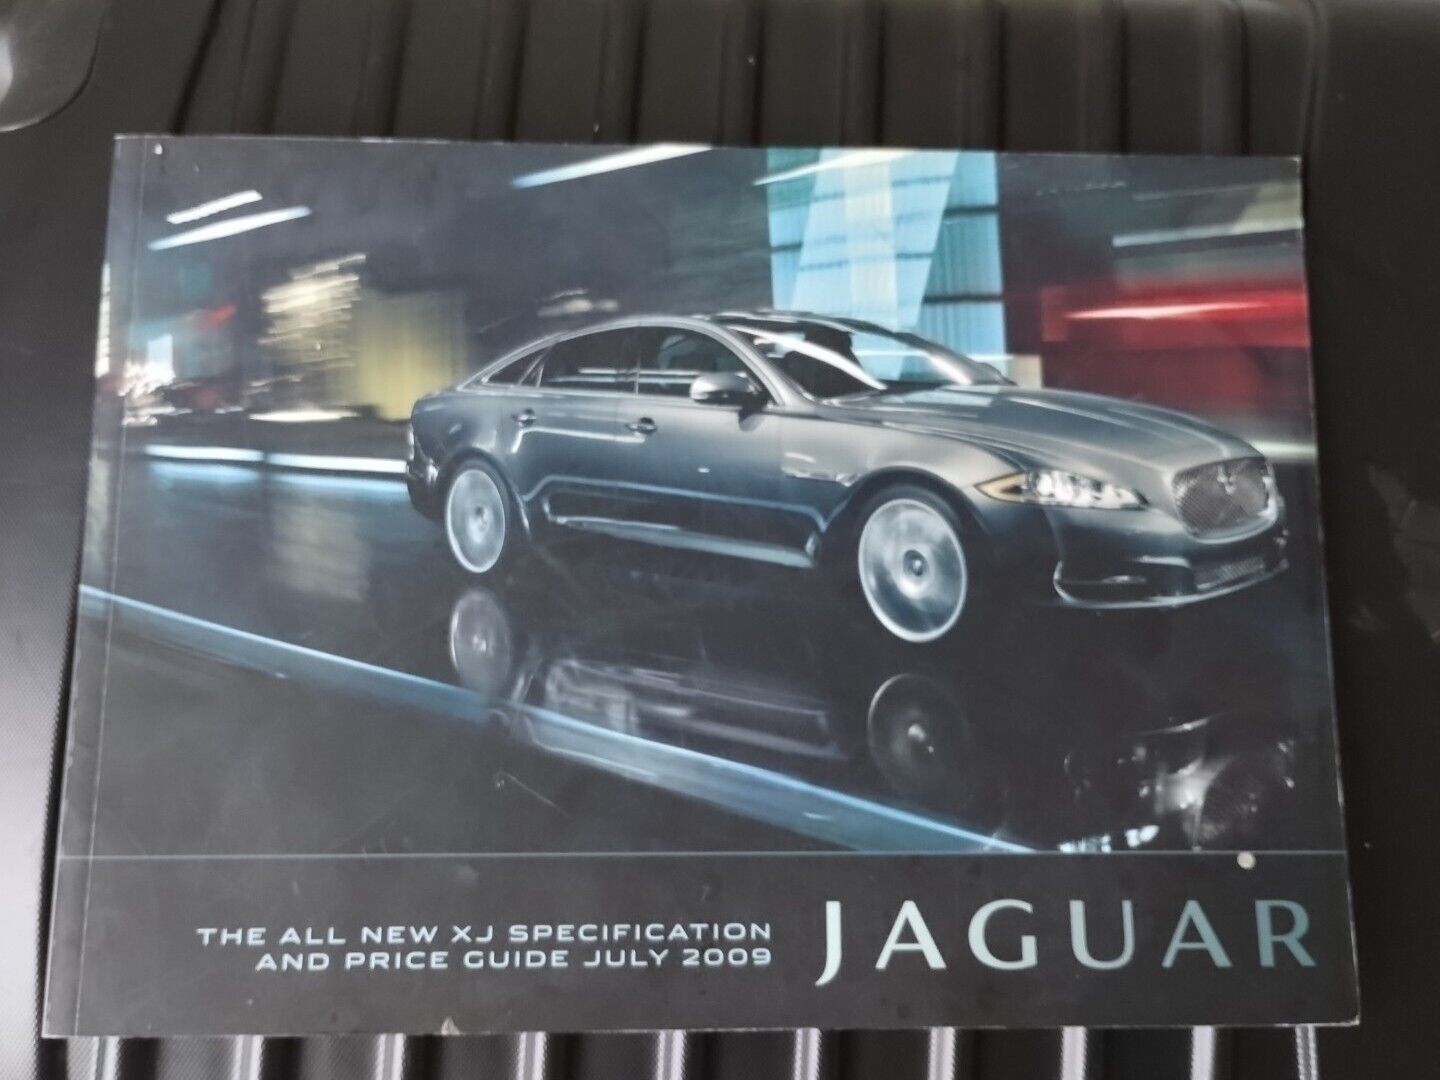 JAGUAR THE ALL NEW XJ SPECIFICATION AND PRICE GUIDE JULY 2009 SALES BROCHURE